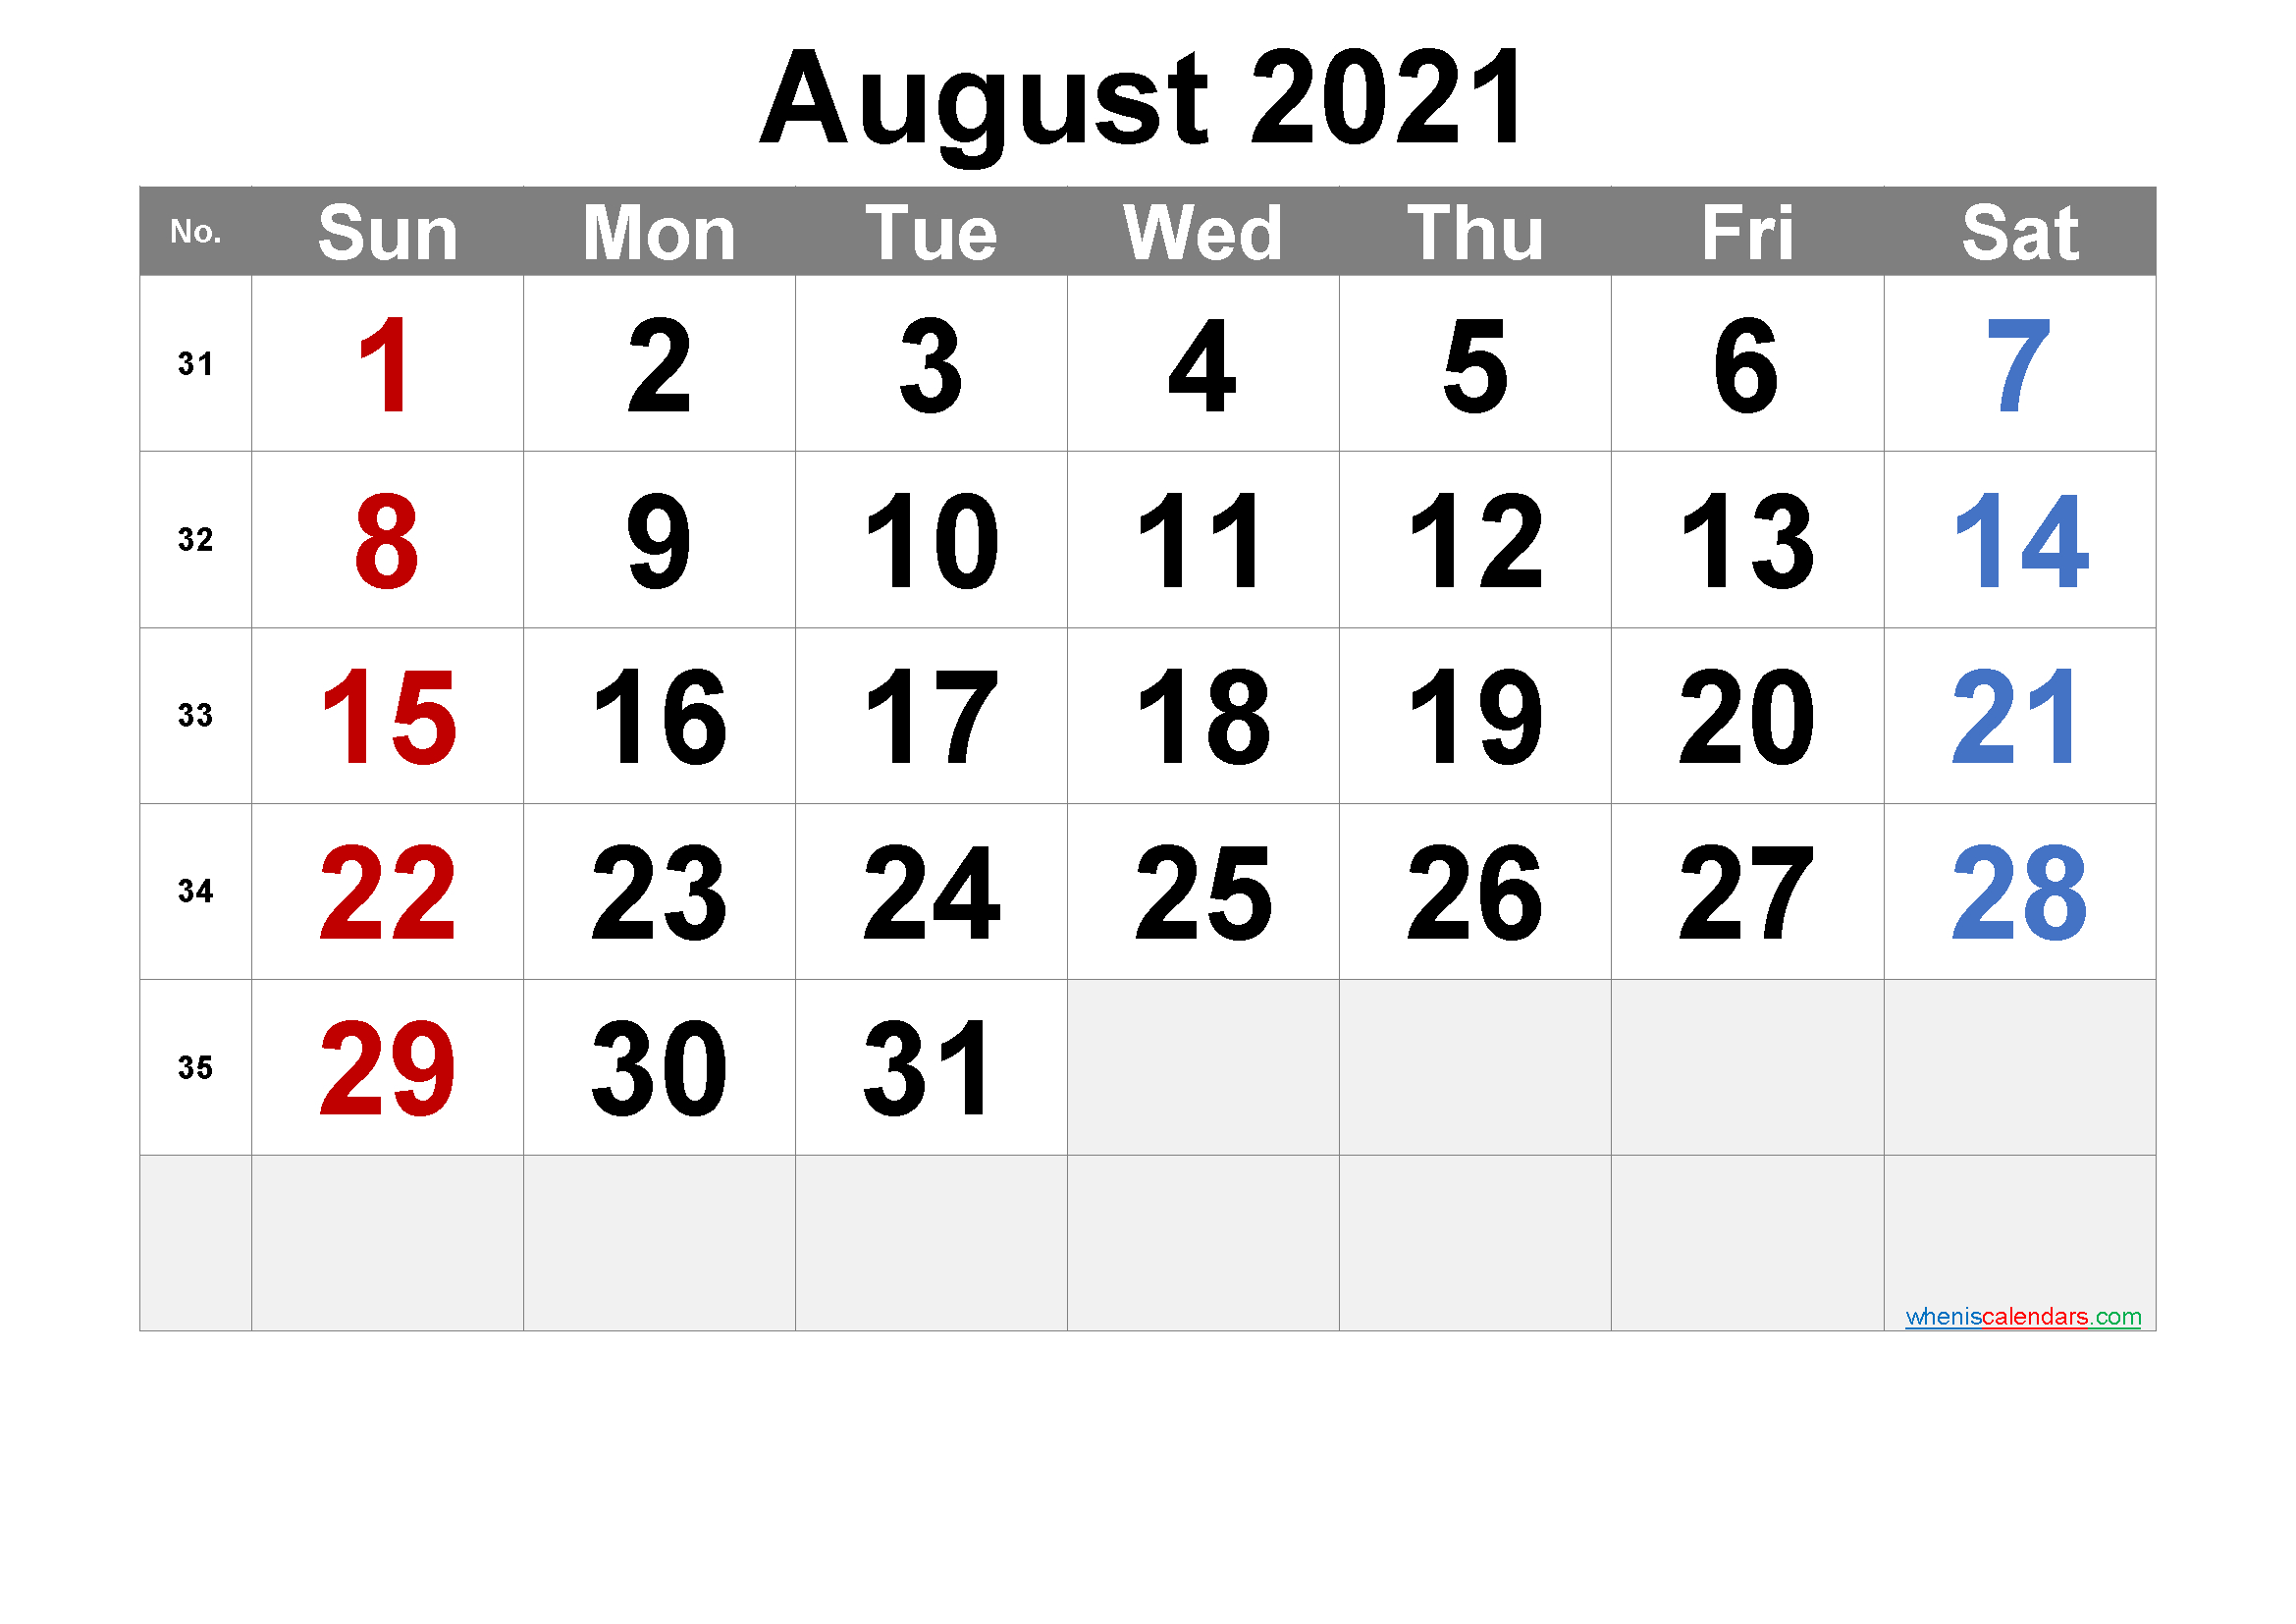 August 2021 Printable Calendar With Holidays | Free-August 2021 Calendar Printable